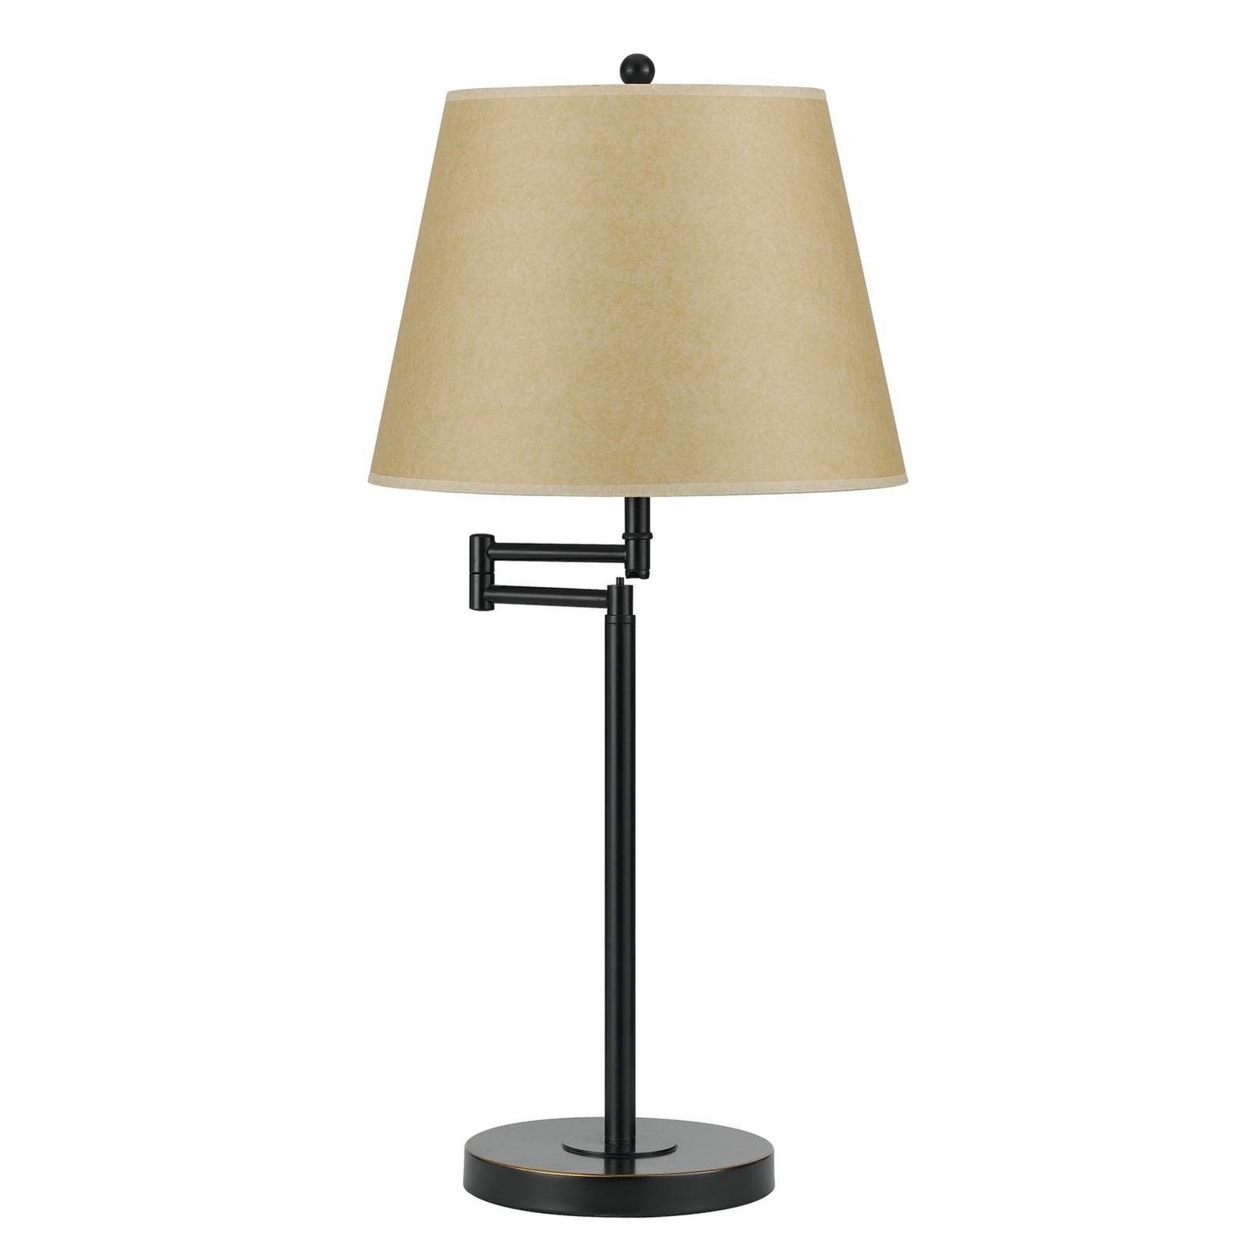 Metal Round 3 Way 27 Table Lamp With Spider Type Shade, Bronze And Brown- Saltoro Sherpi